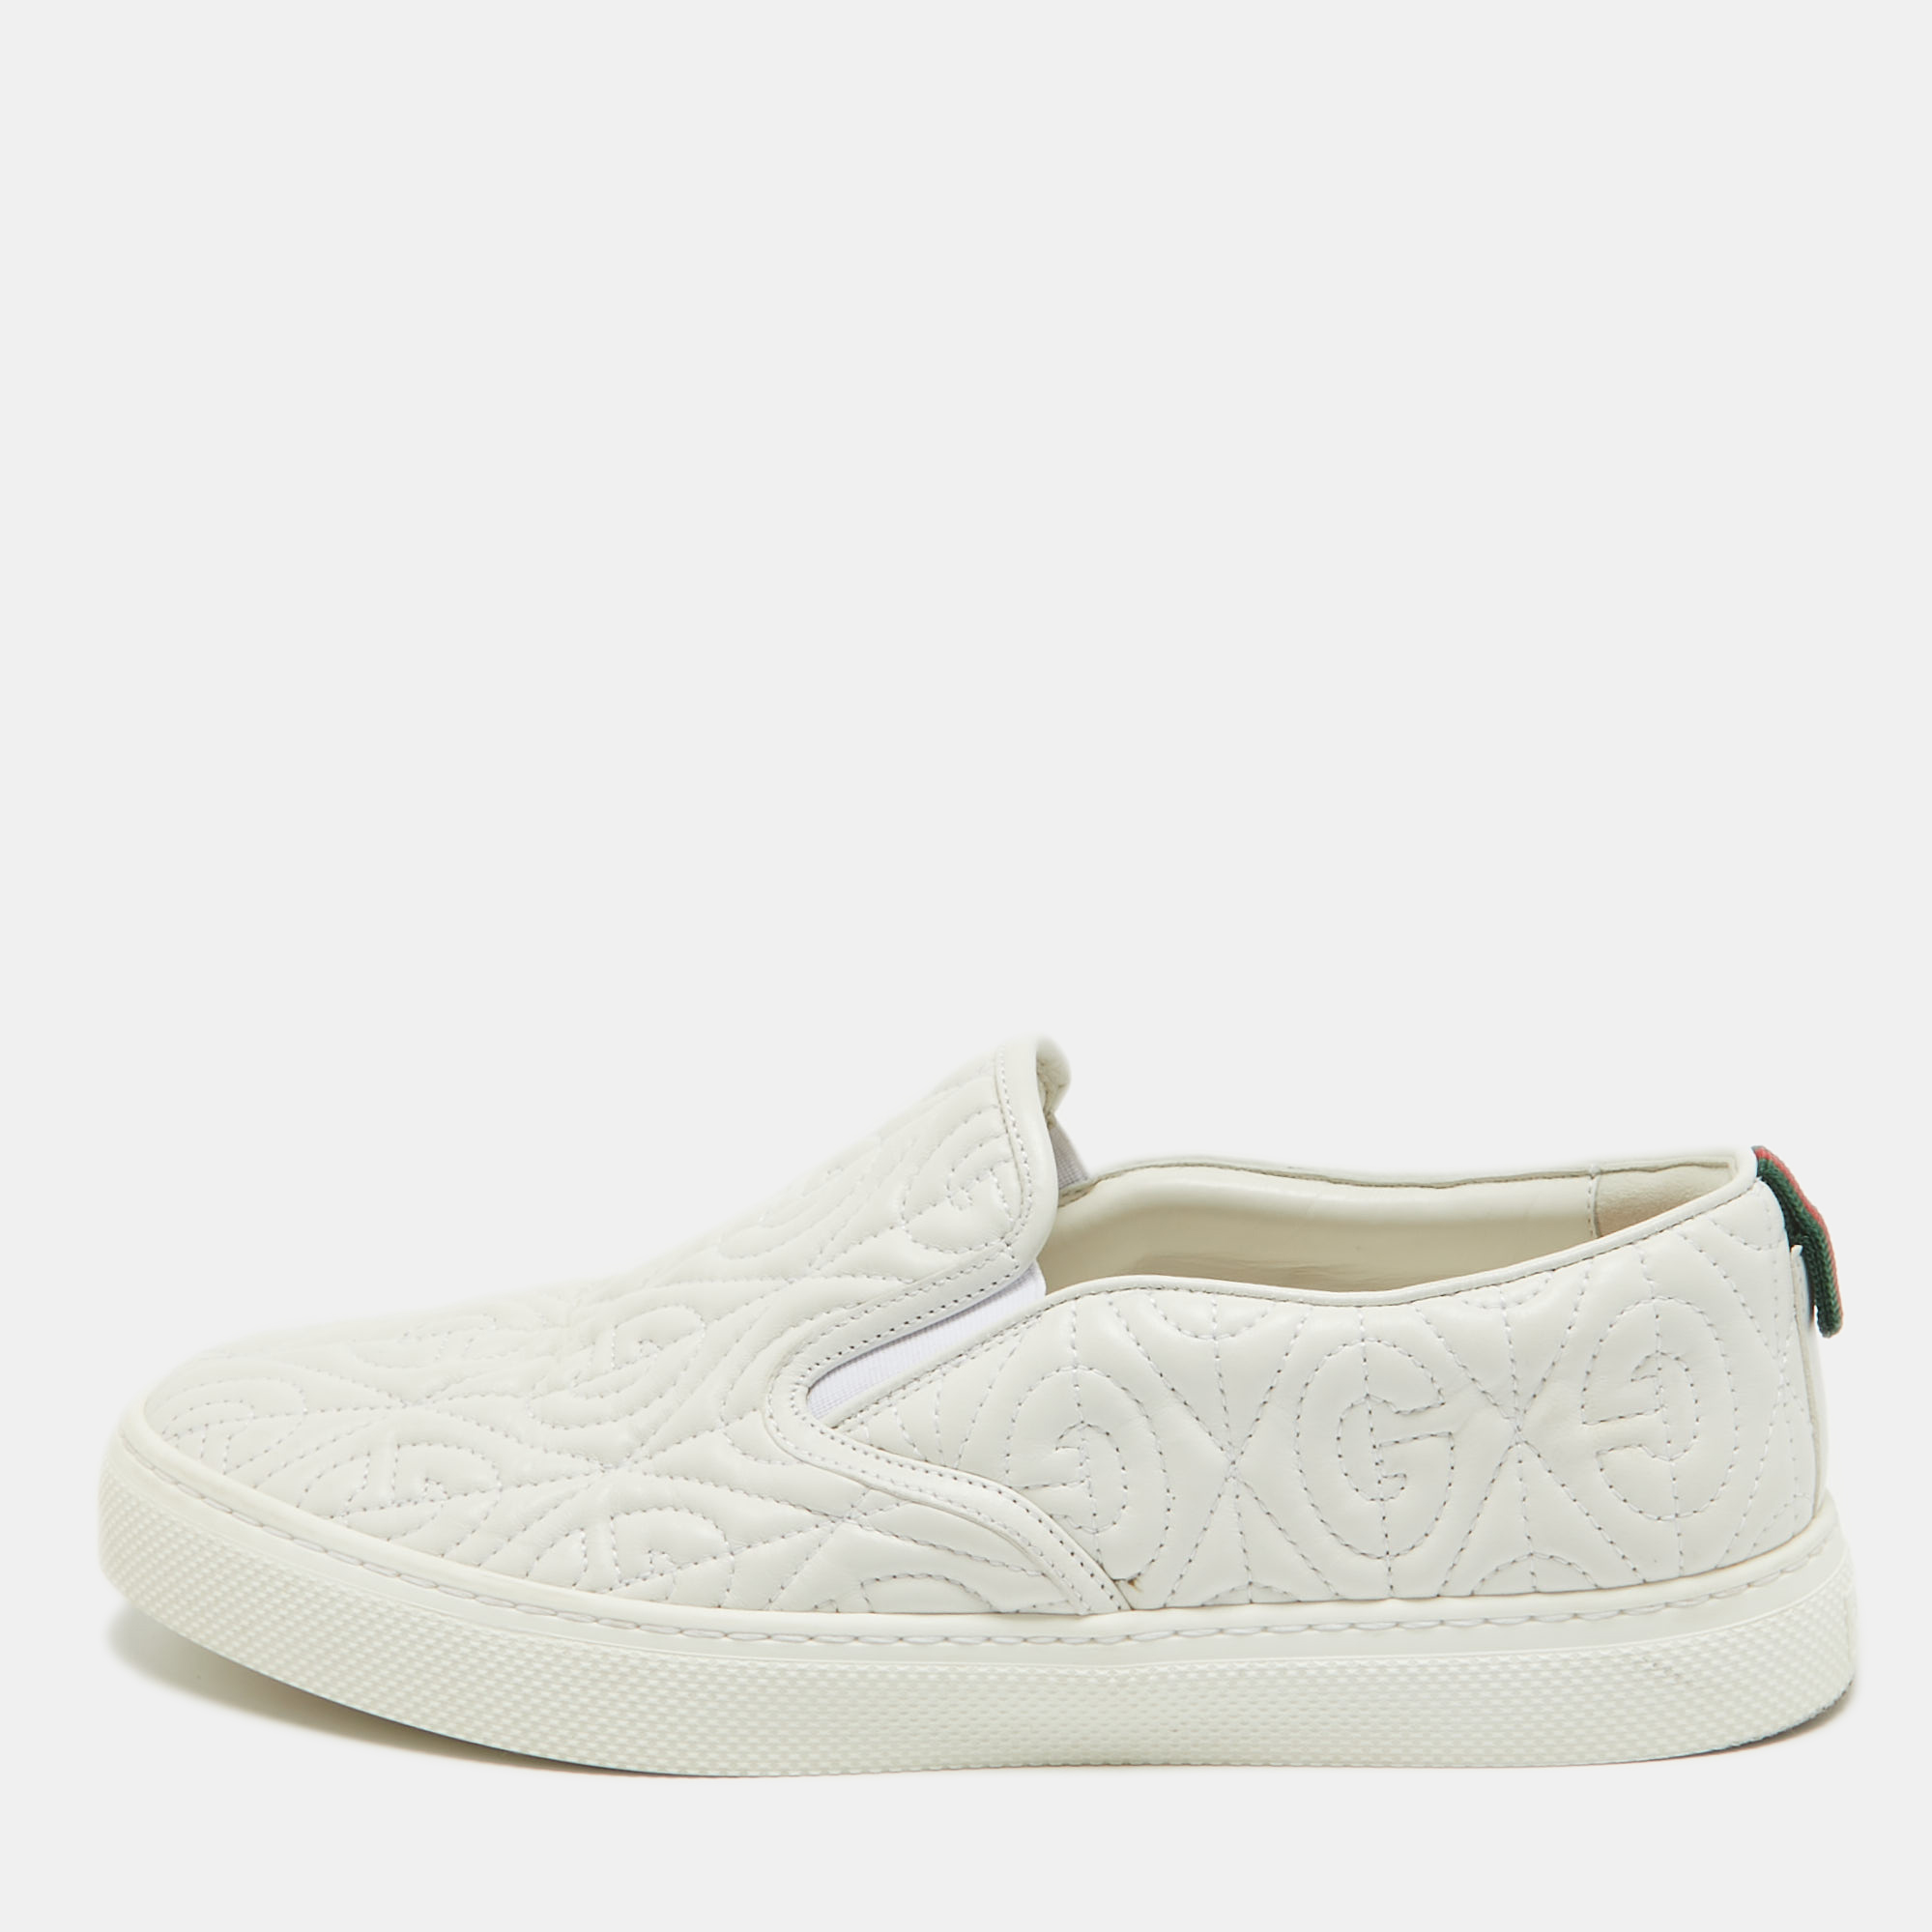 Pre-owned Gucci White Leather G Rhombus Slip On Sneakers Size 42